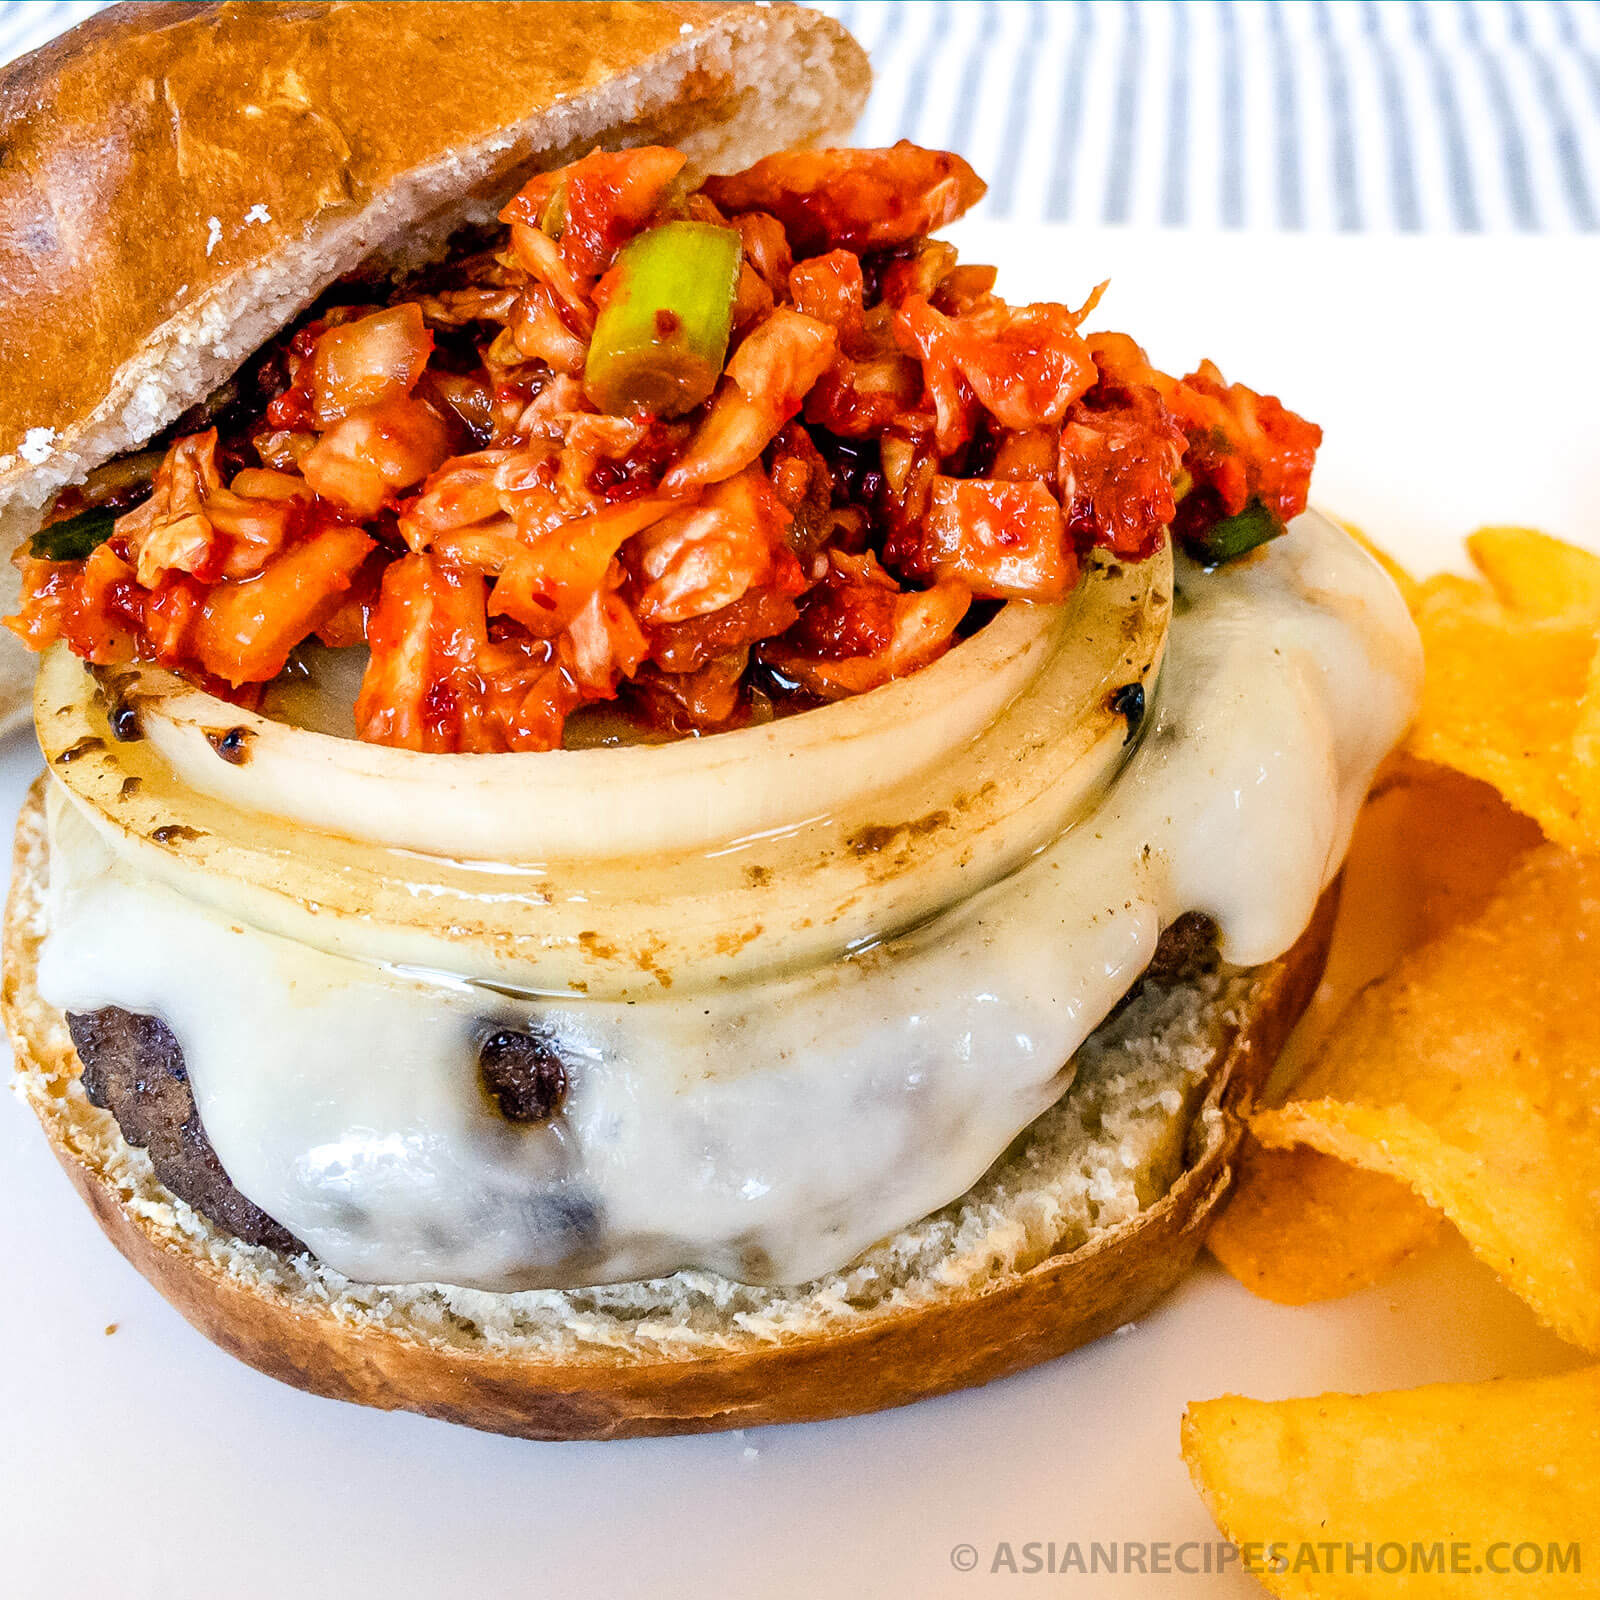 This Korean BBQ Bulgogi Burger recipe is marinated in a slightly sweet and savory marinade, cooked on the grill, and then topped with cheese and delicious homemade kimchi relish.